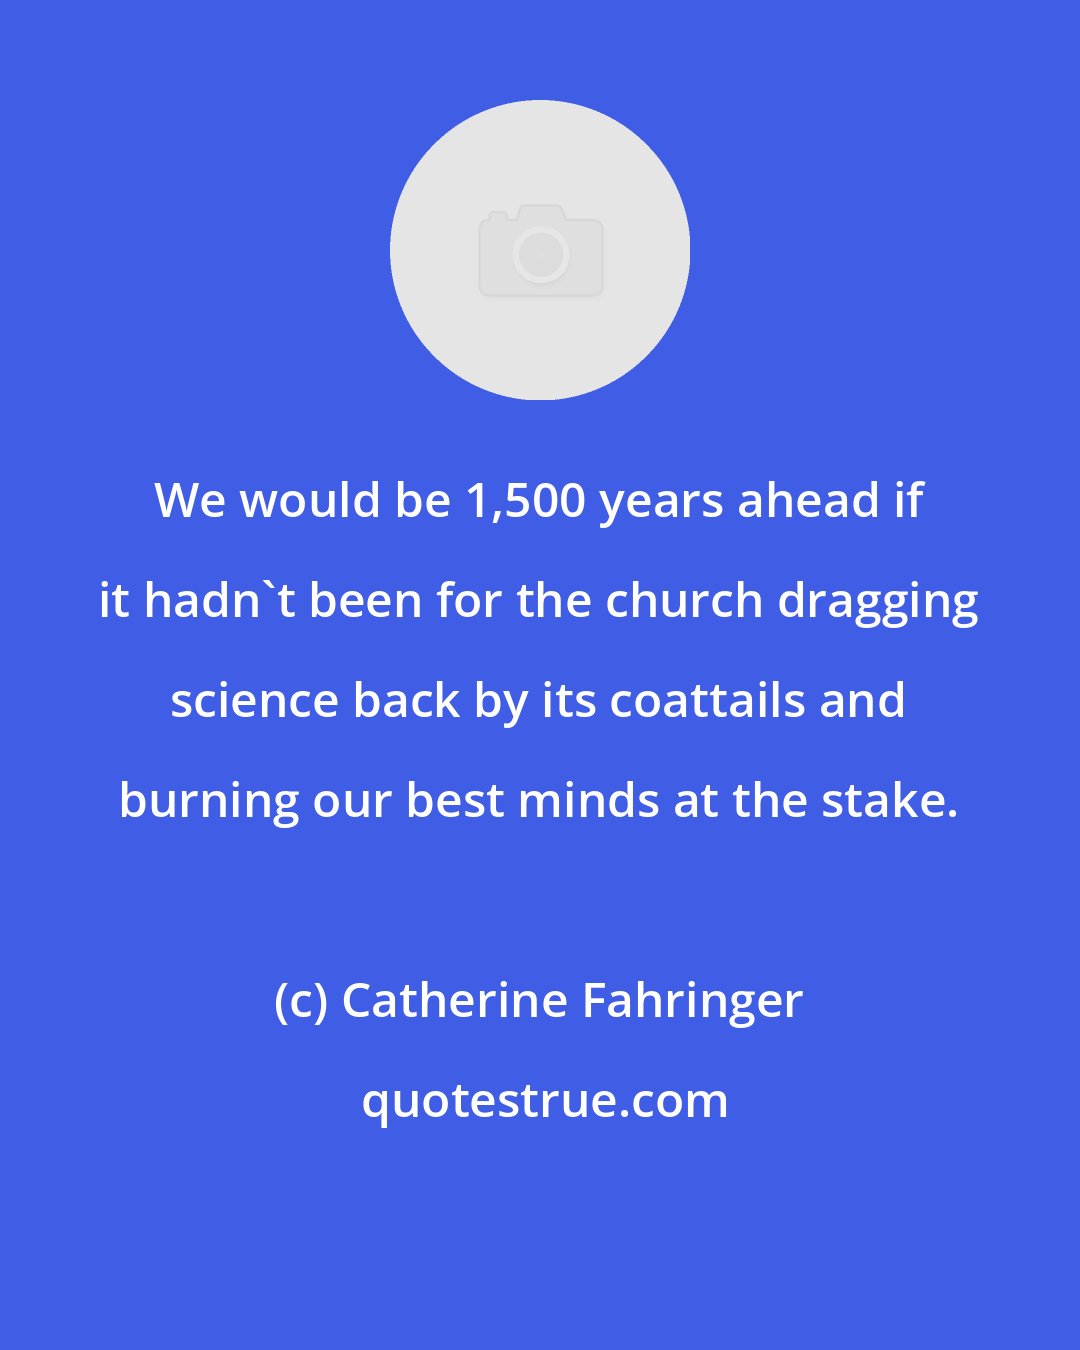 Catherine Fahringer: We would be 1,500 years ahead if it hadn't been for the church dragging science back by its coattails and burning our best minds at the stake.